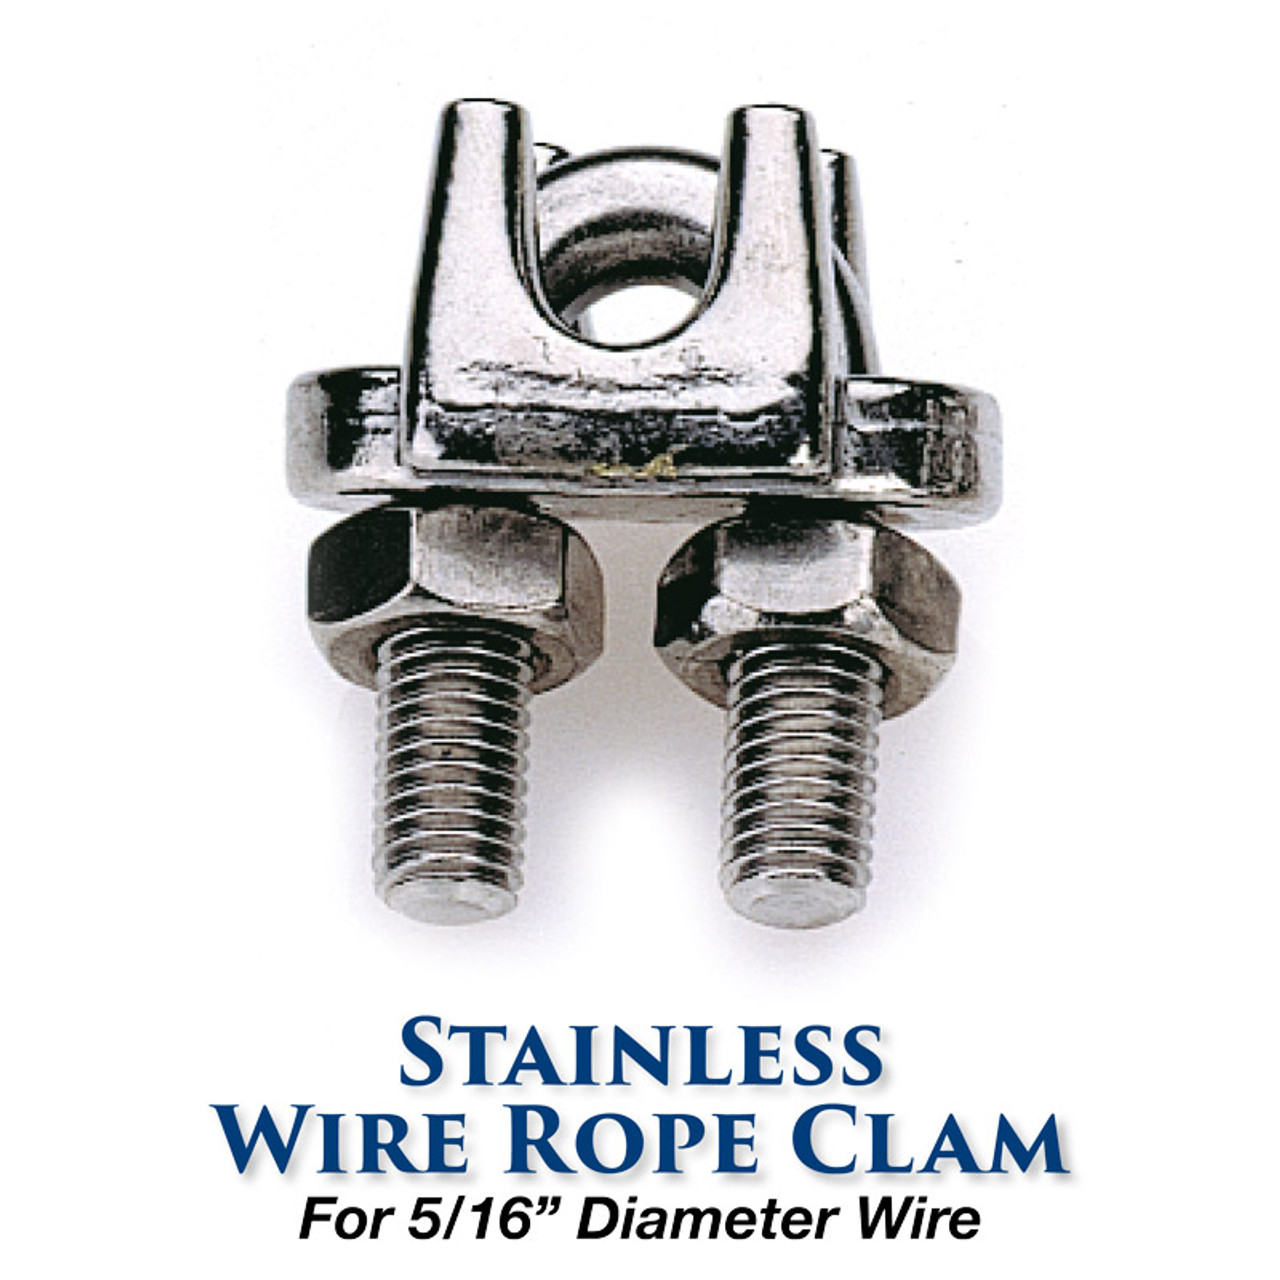 Stainless Wire Rope Clamp - 5/16-inch Wire Size